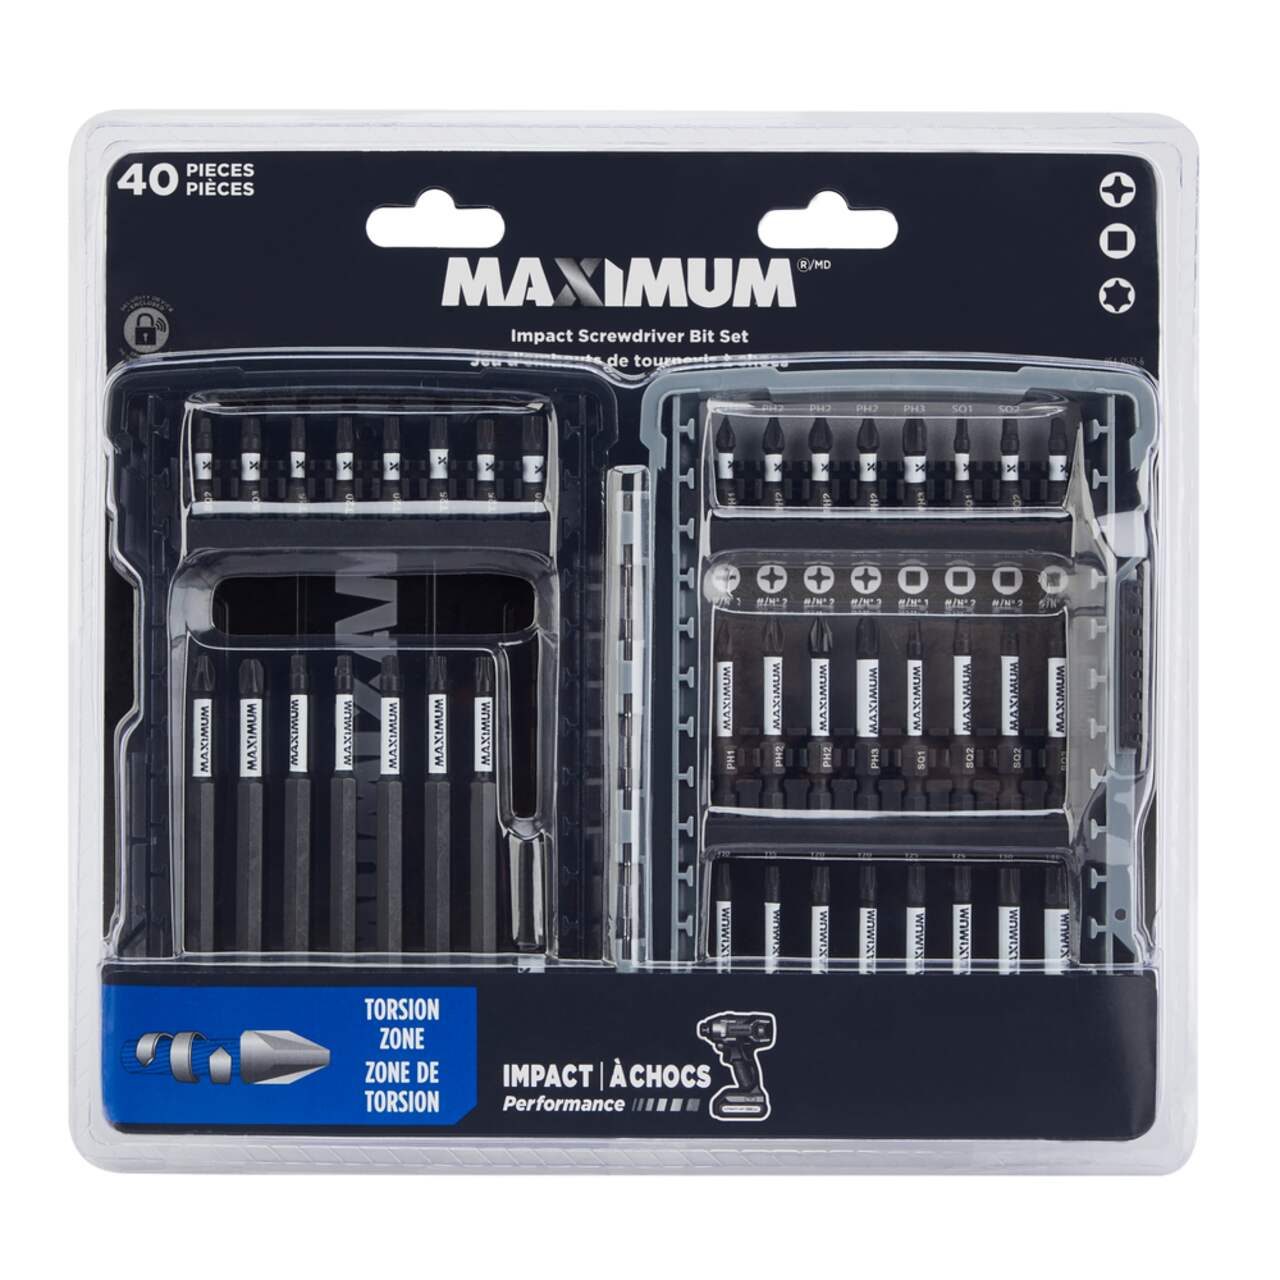 https://media-www.canadiantire.ca/product/fixing/tools/power-tool-accessories/0540532/maximum-40pc-impact-ready-screwdriver-bit-set-911472f8-47c3-4eed-a67e-c37a28ecd26d.png?imdensity=1&imwidth=640&impolicy=mZoom